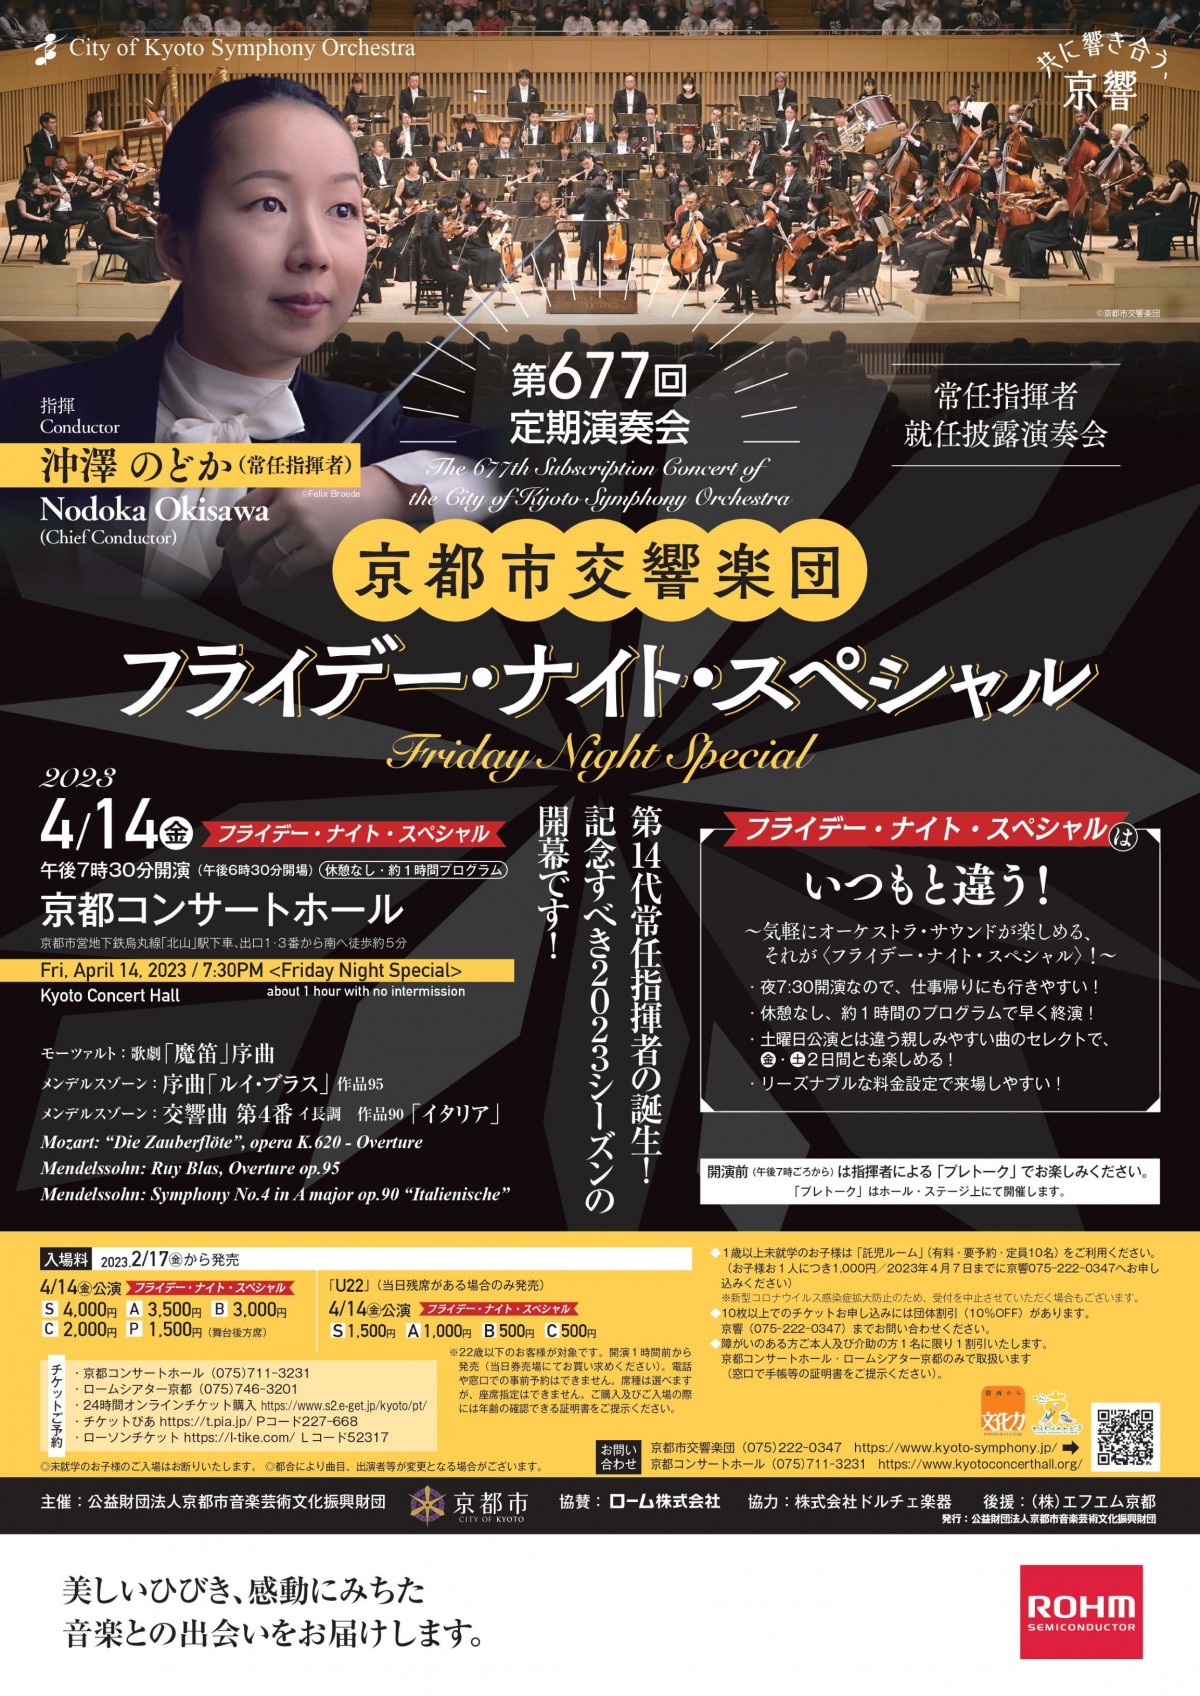 The 677th Subscription Concert
《Friday Night Special》